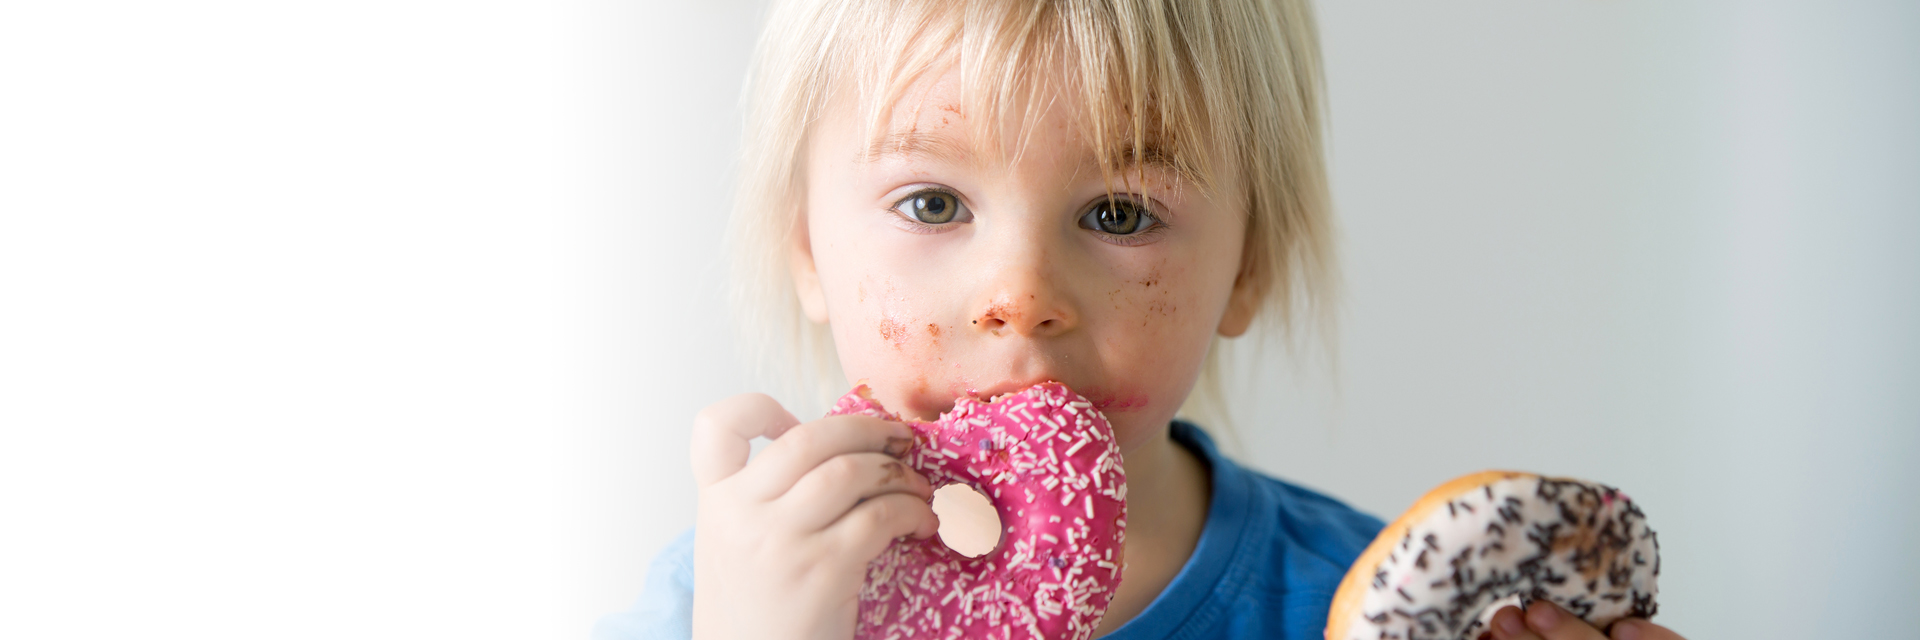 Child eating donuts